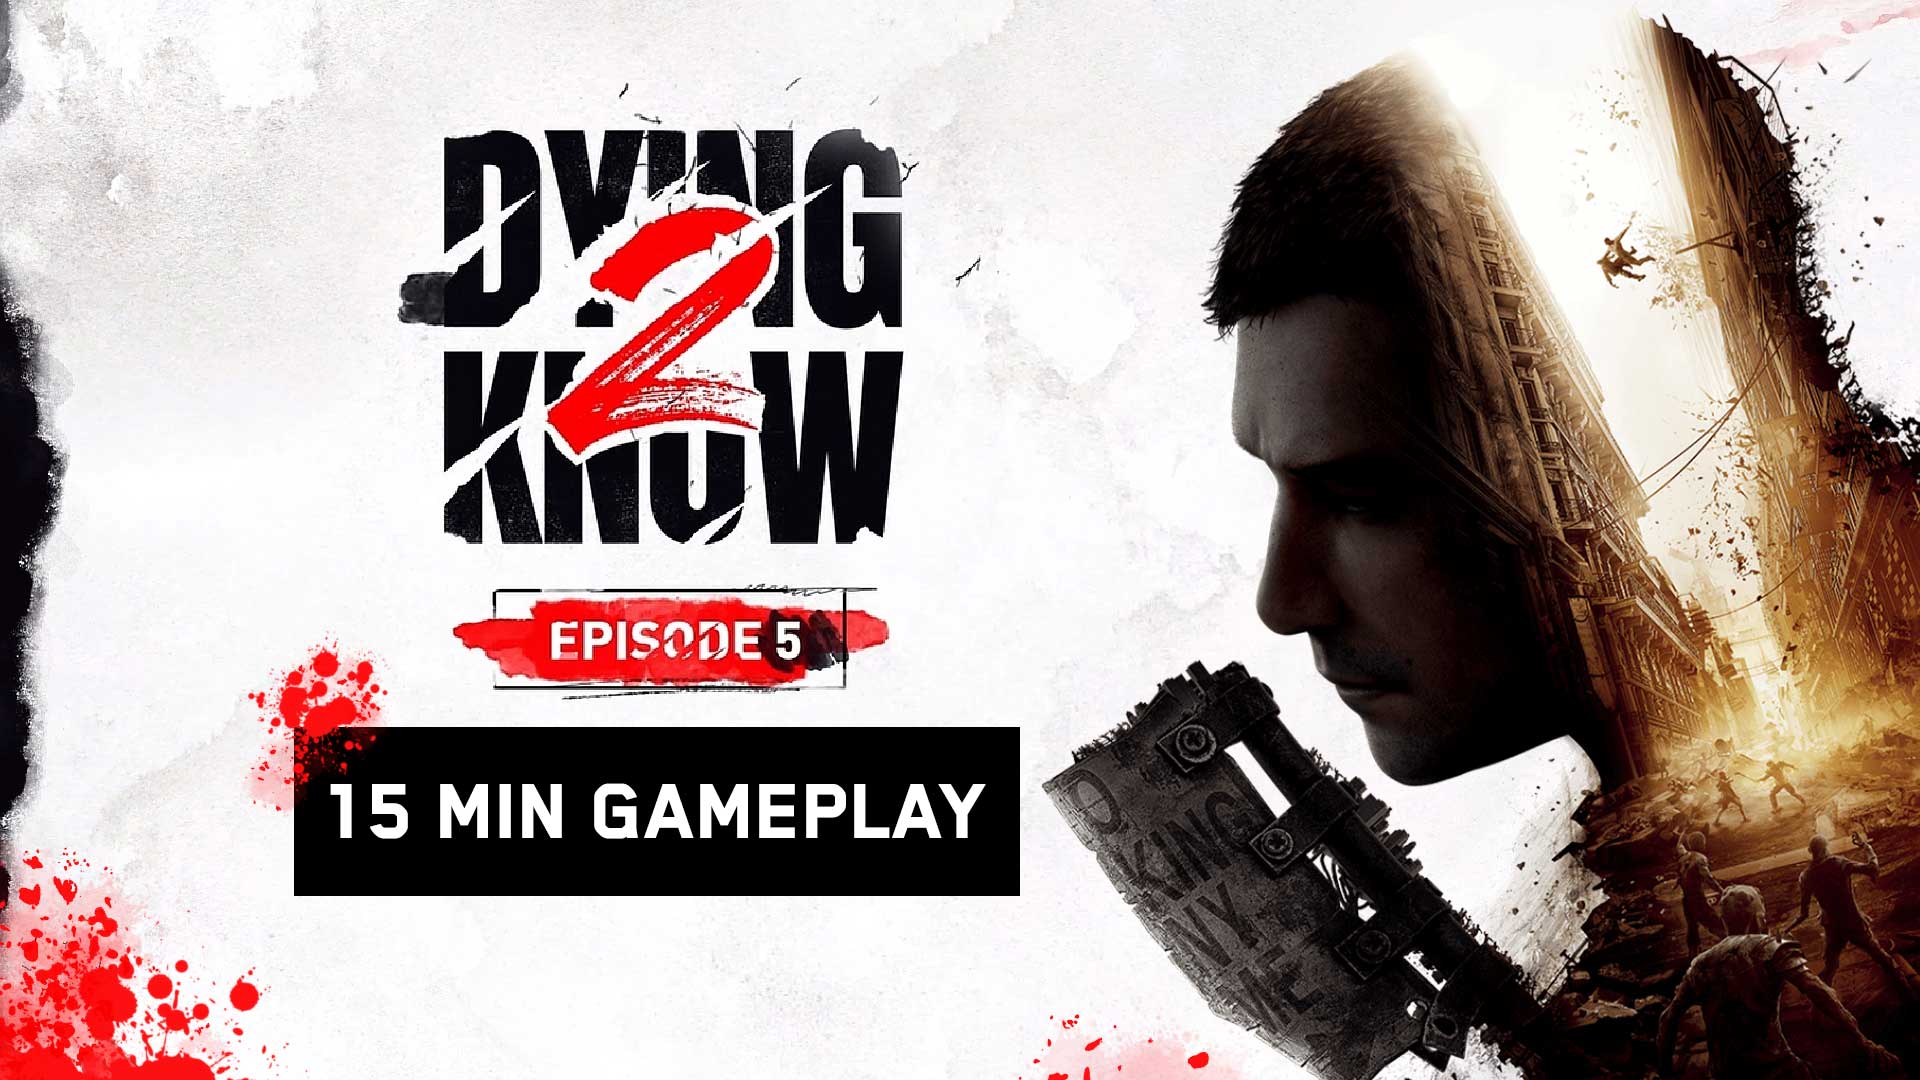 dying light 2 dying2know episode 5 new gameplay